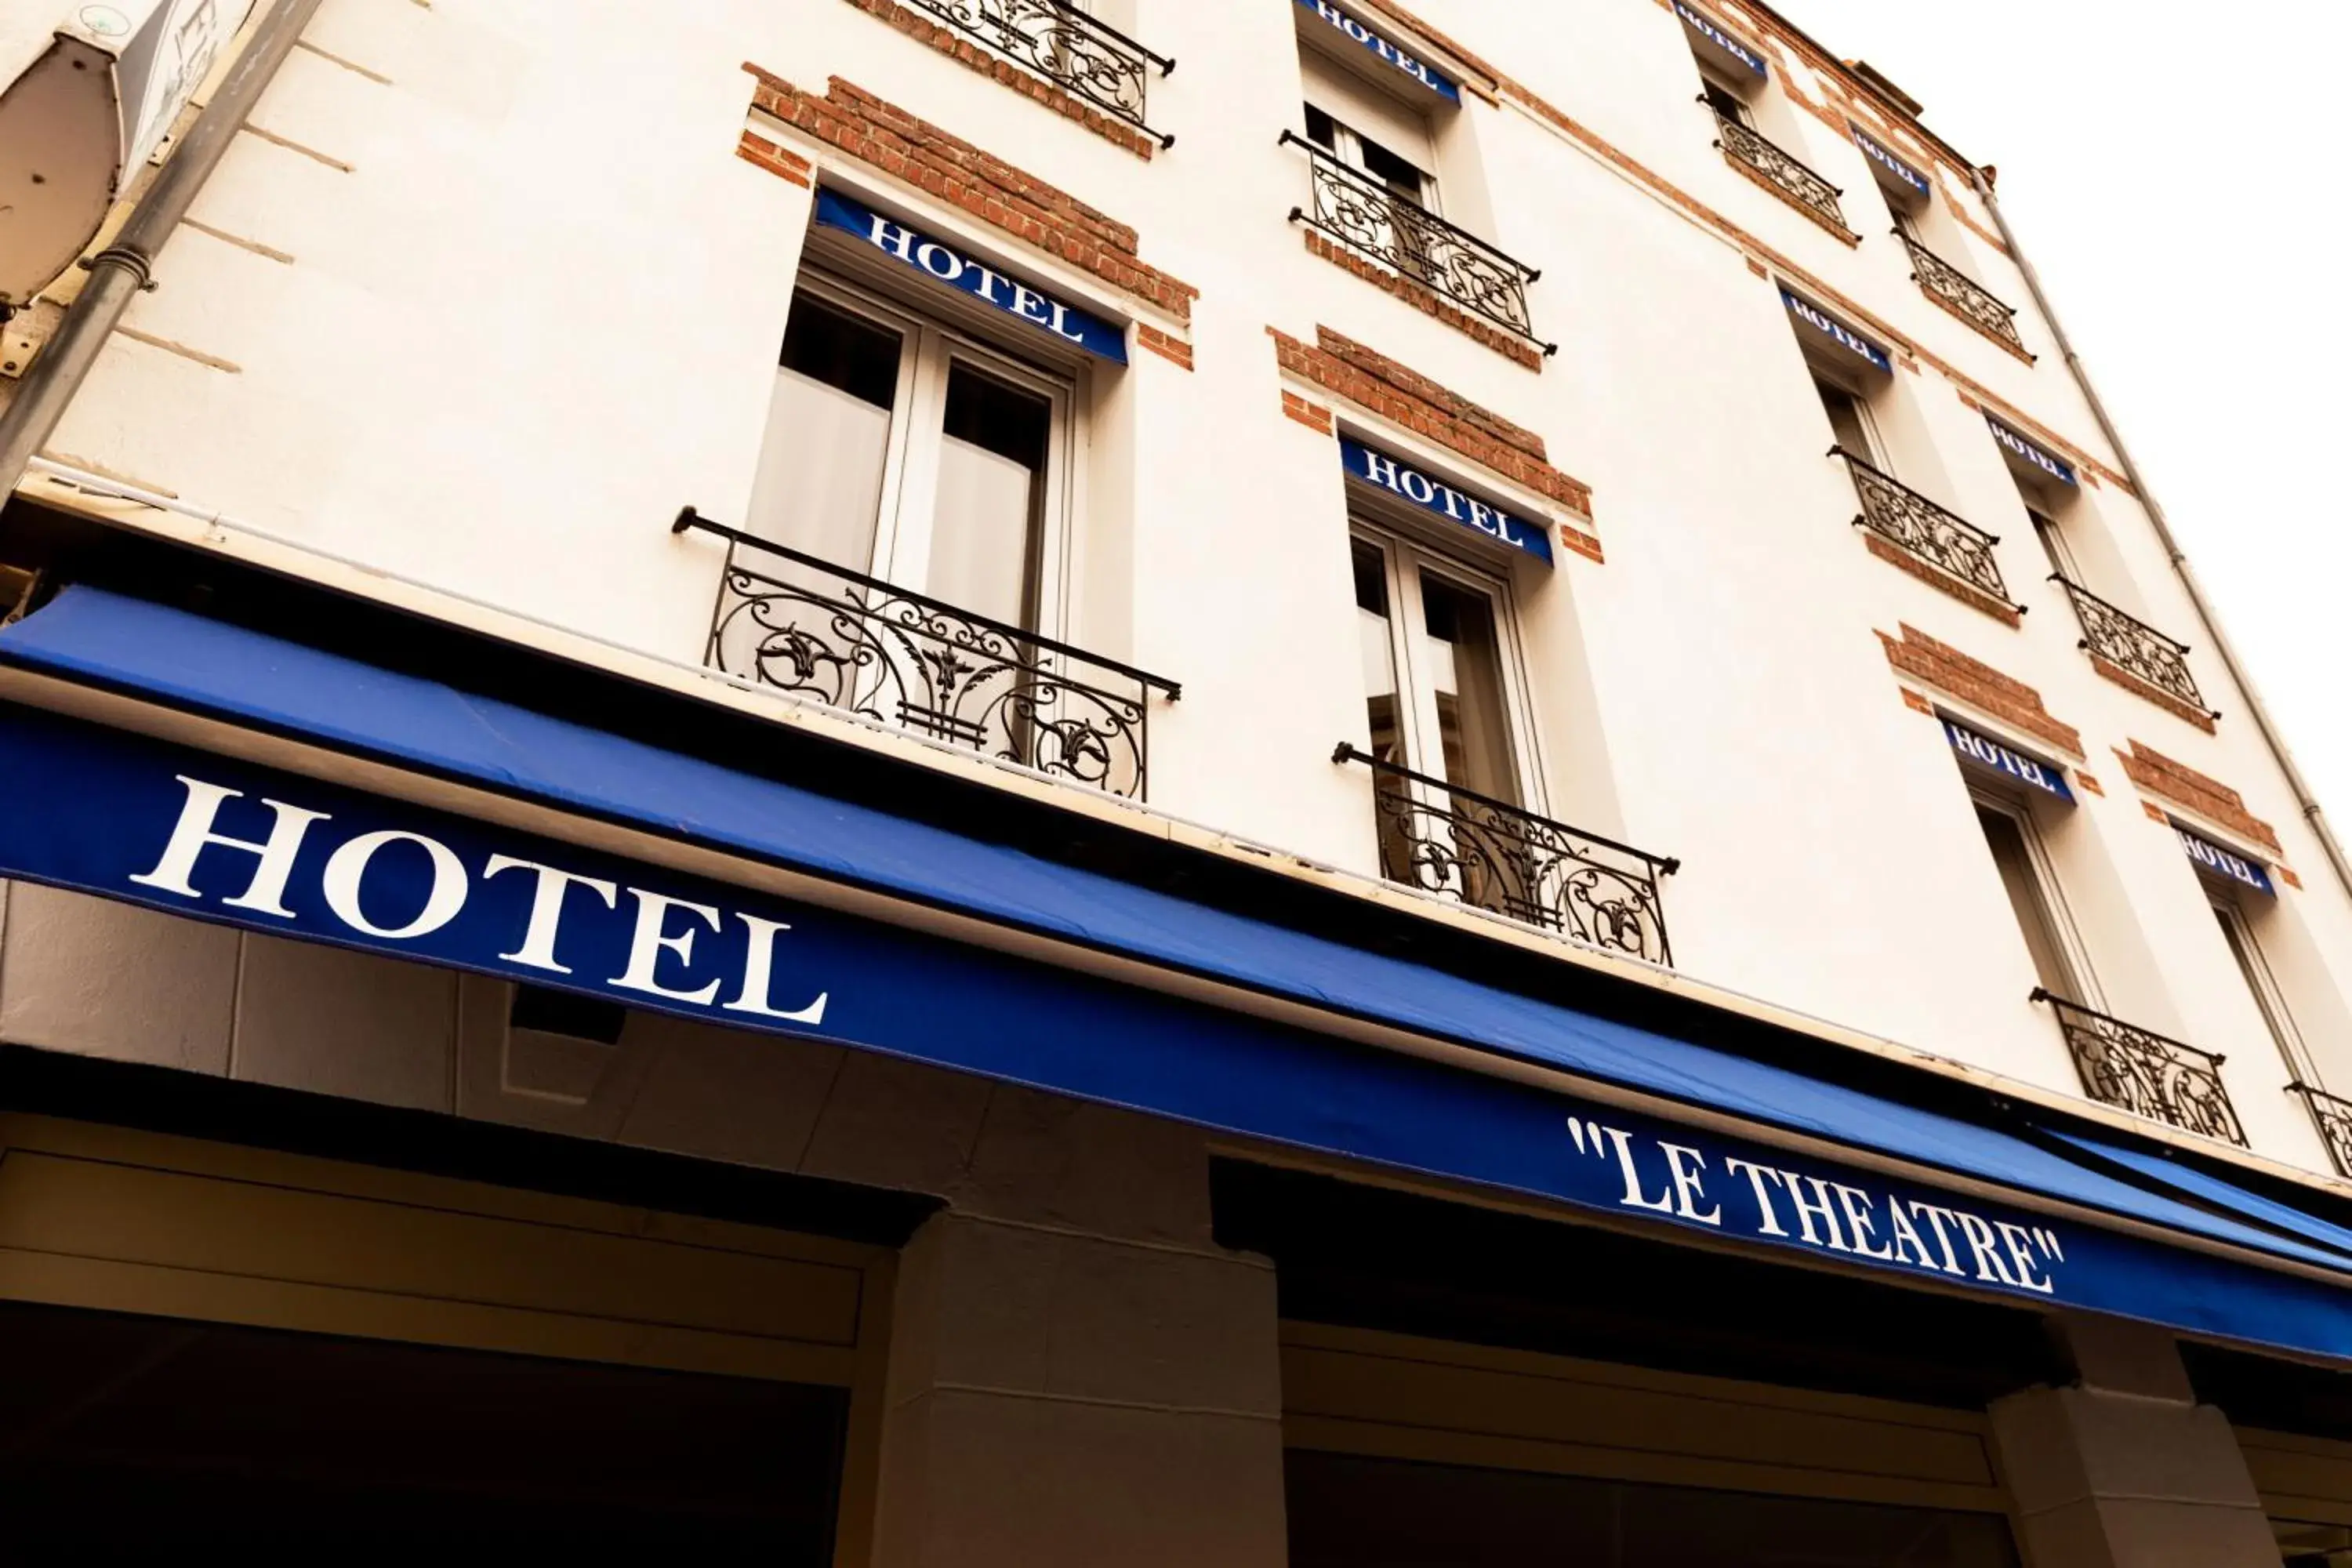 Property Building in Le Theatre